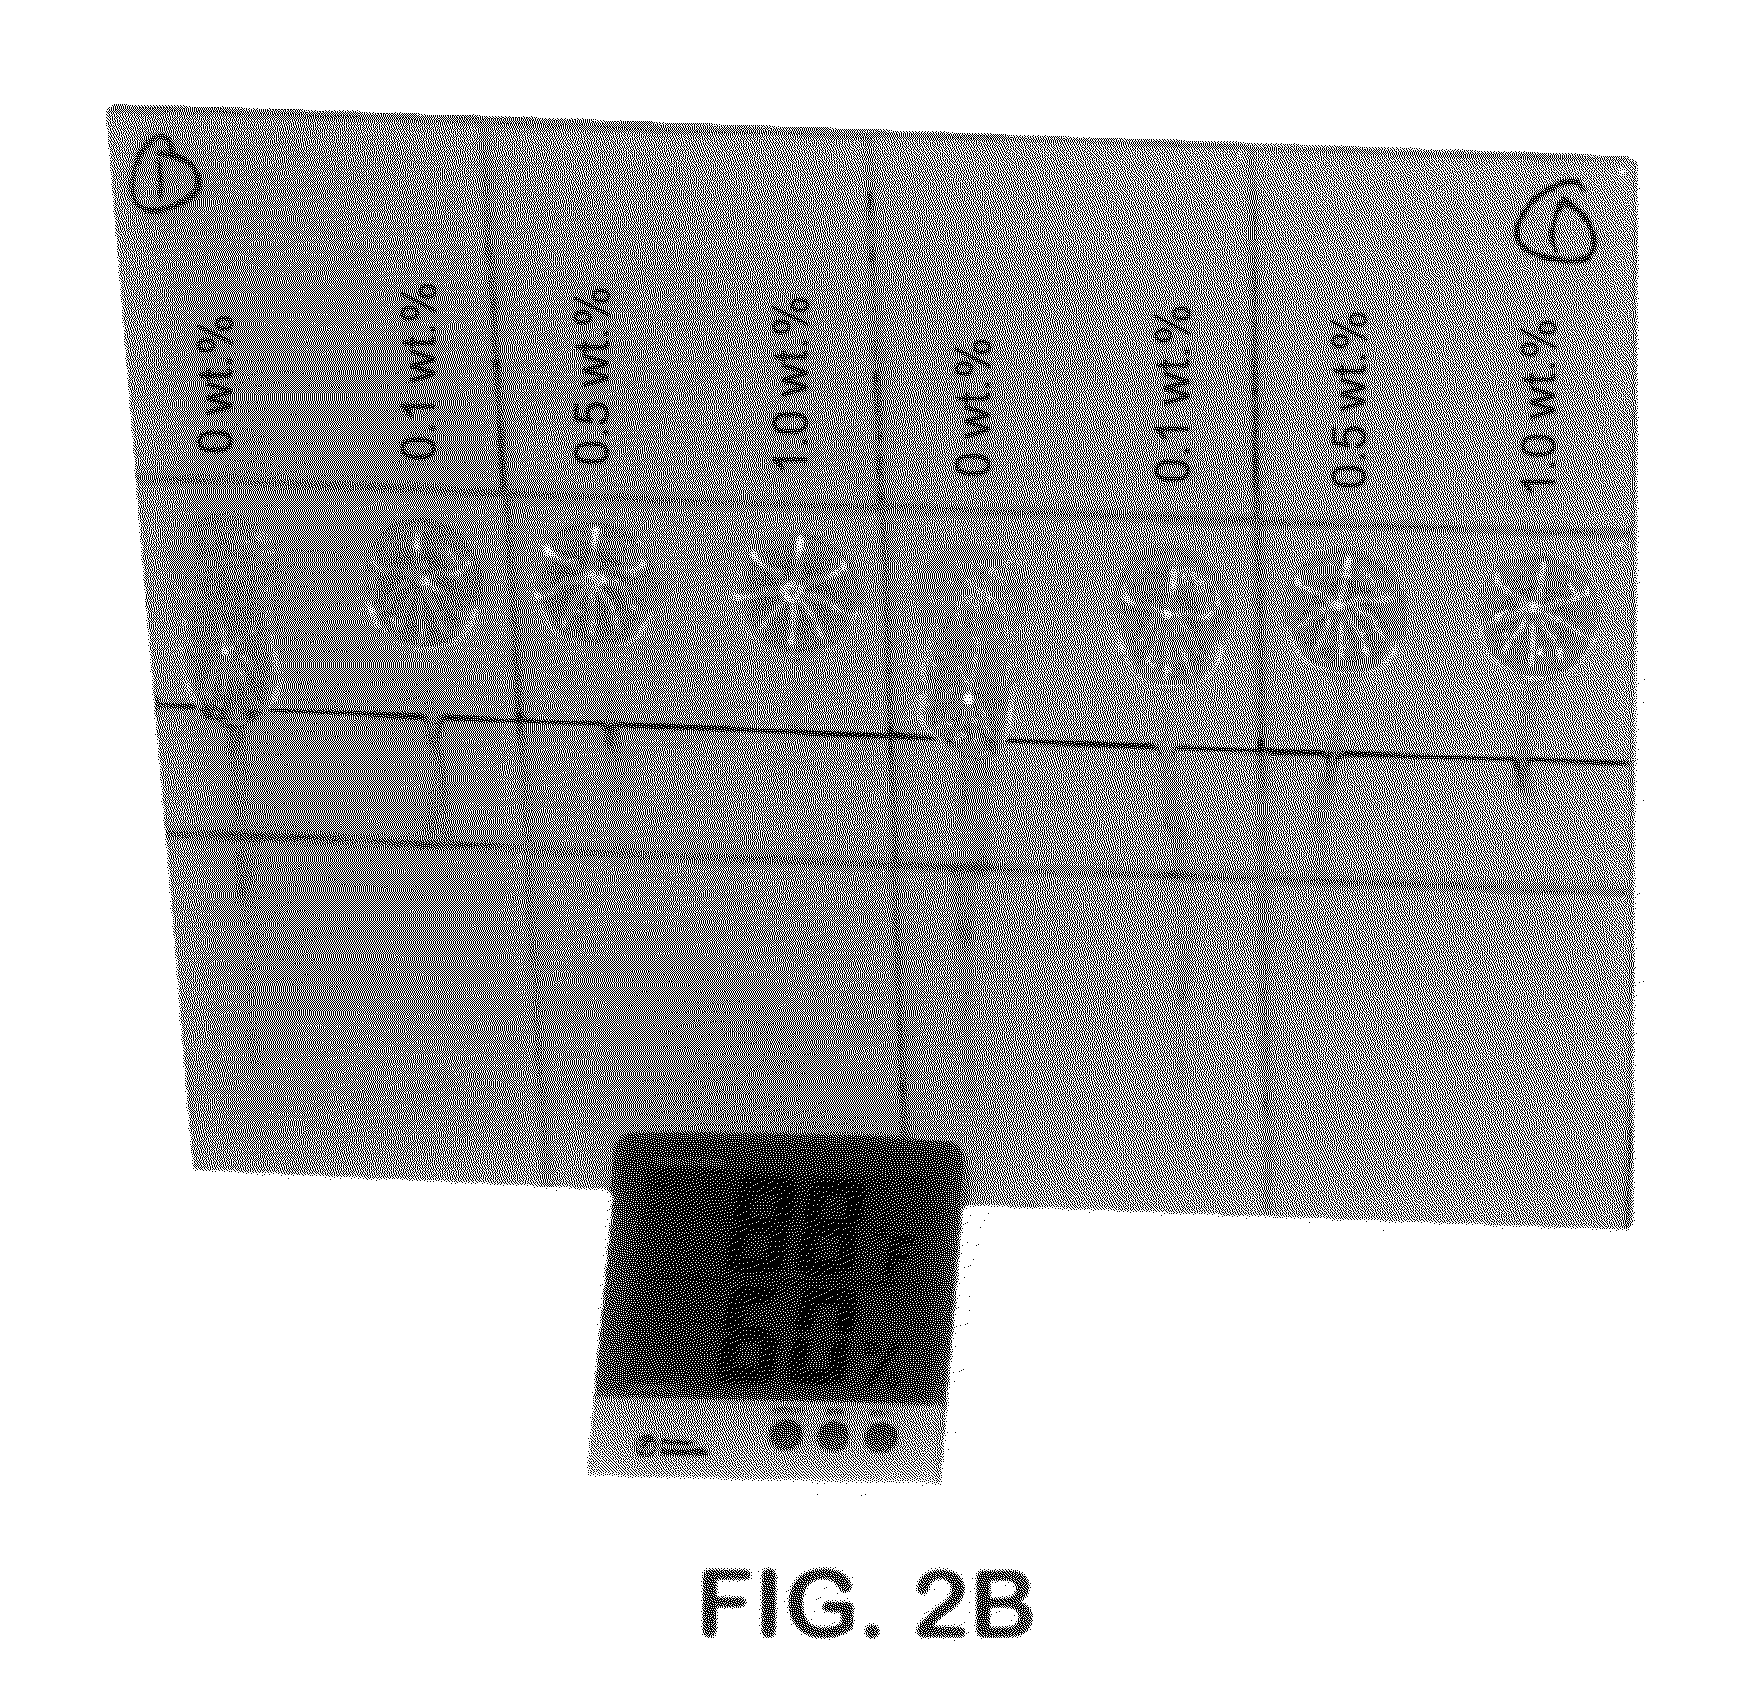 Cleaning composition having high self-adhesion and providing residual benefits